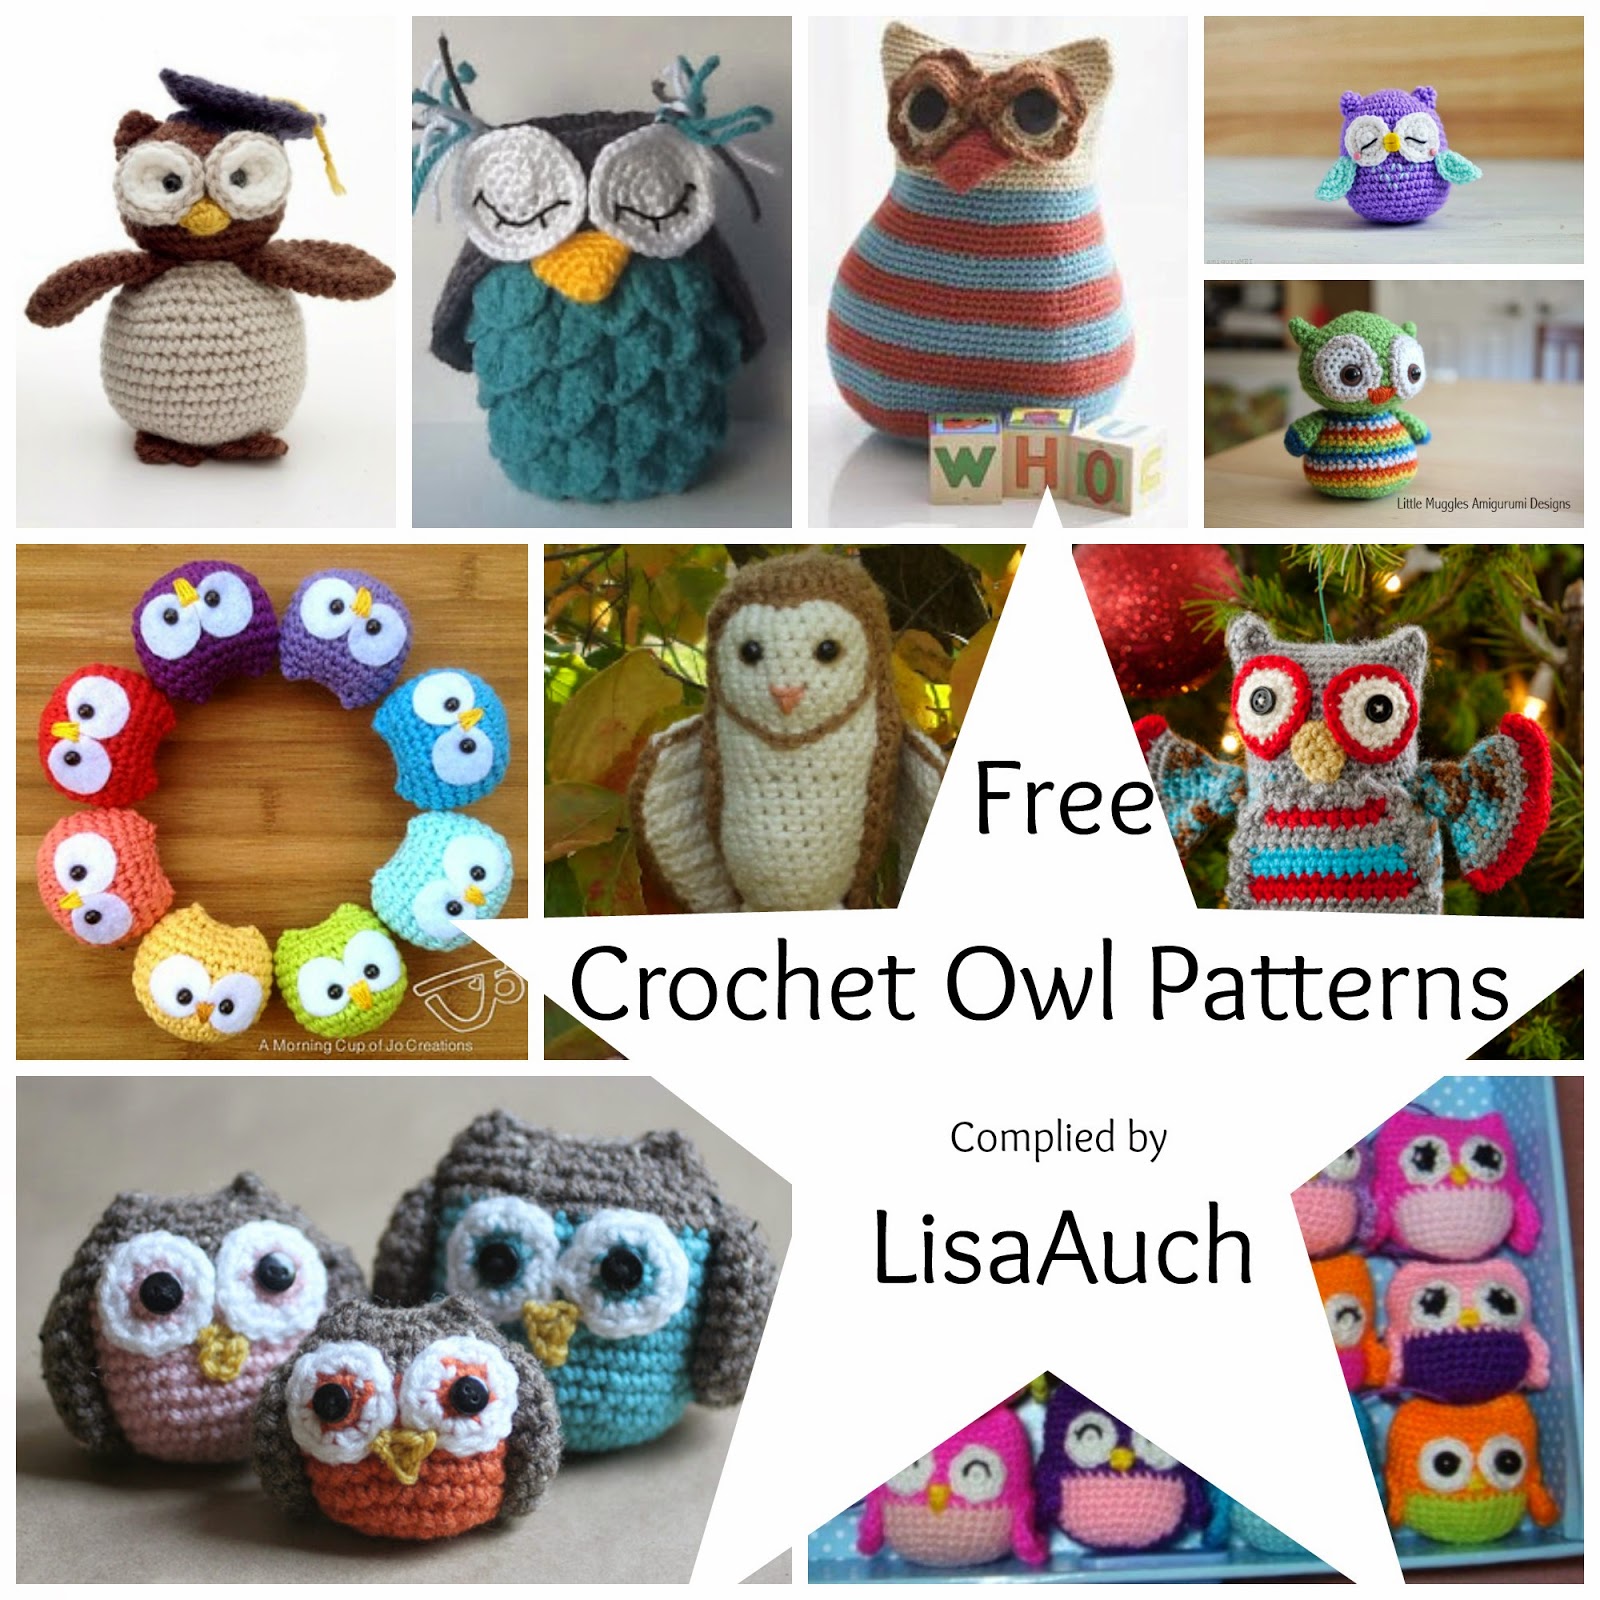 Free Crochet  Patterns and Designs by LisaAuch Free 